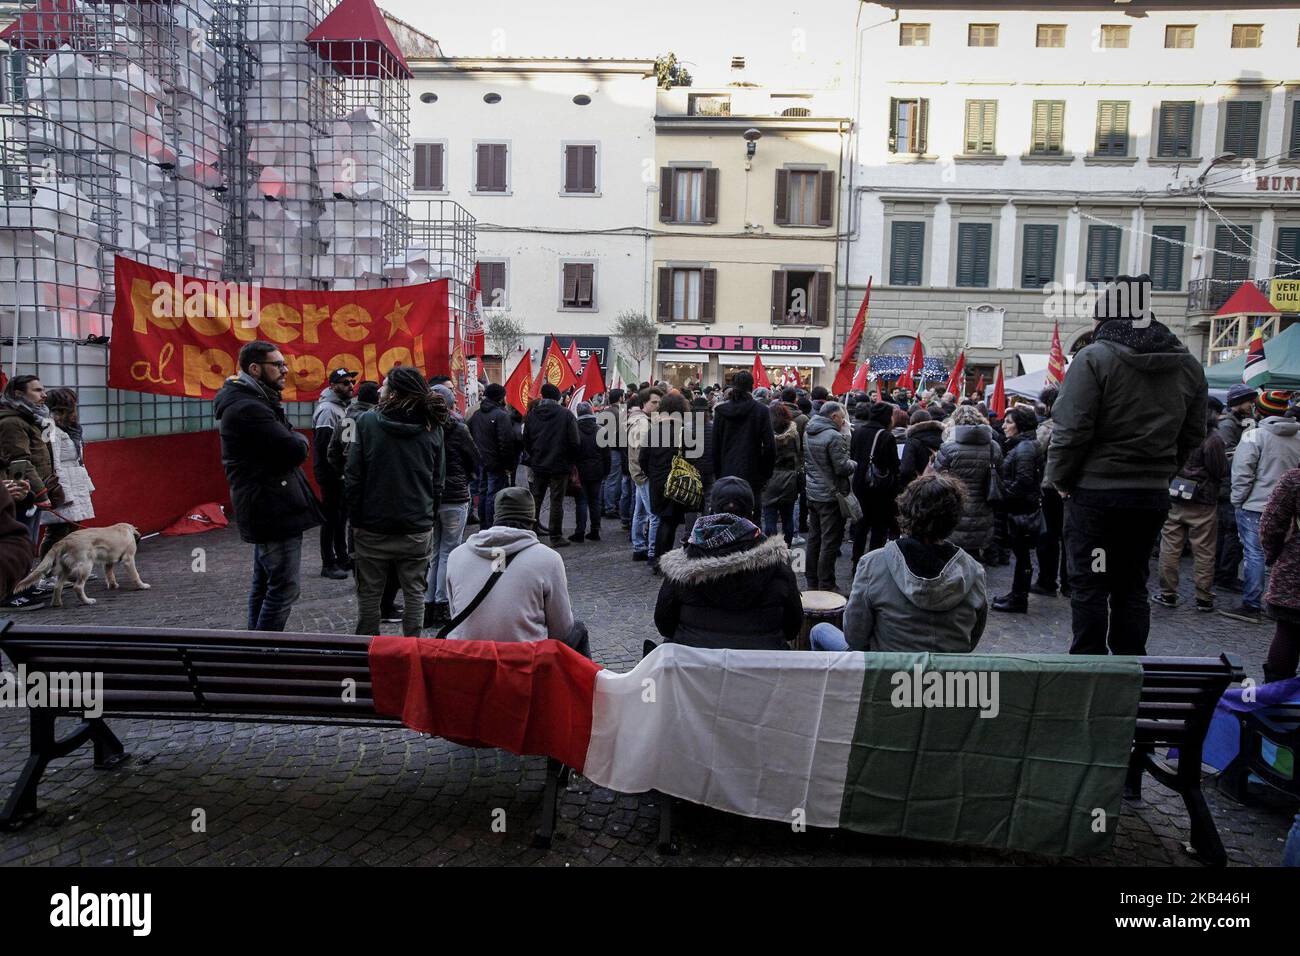 The opening of the headquarter of Casapound a neofascist party in Pontedera a province of Pisa, Italy, on 15 December 2018 call to a protest and a mobilization of the leftist parties and associations (Photo by Enrico Mattia Del Punta/NurPhoto) Stock Photo